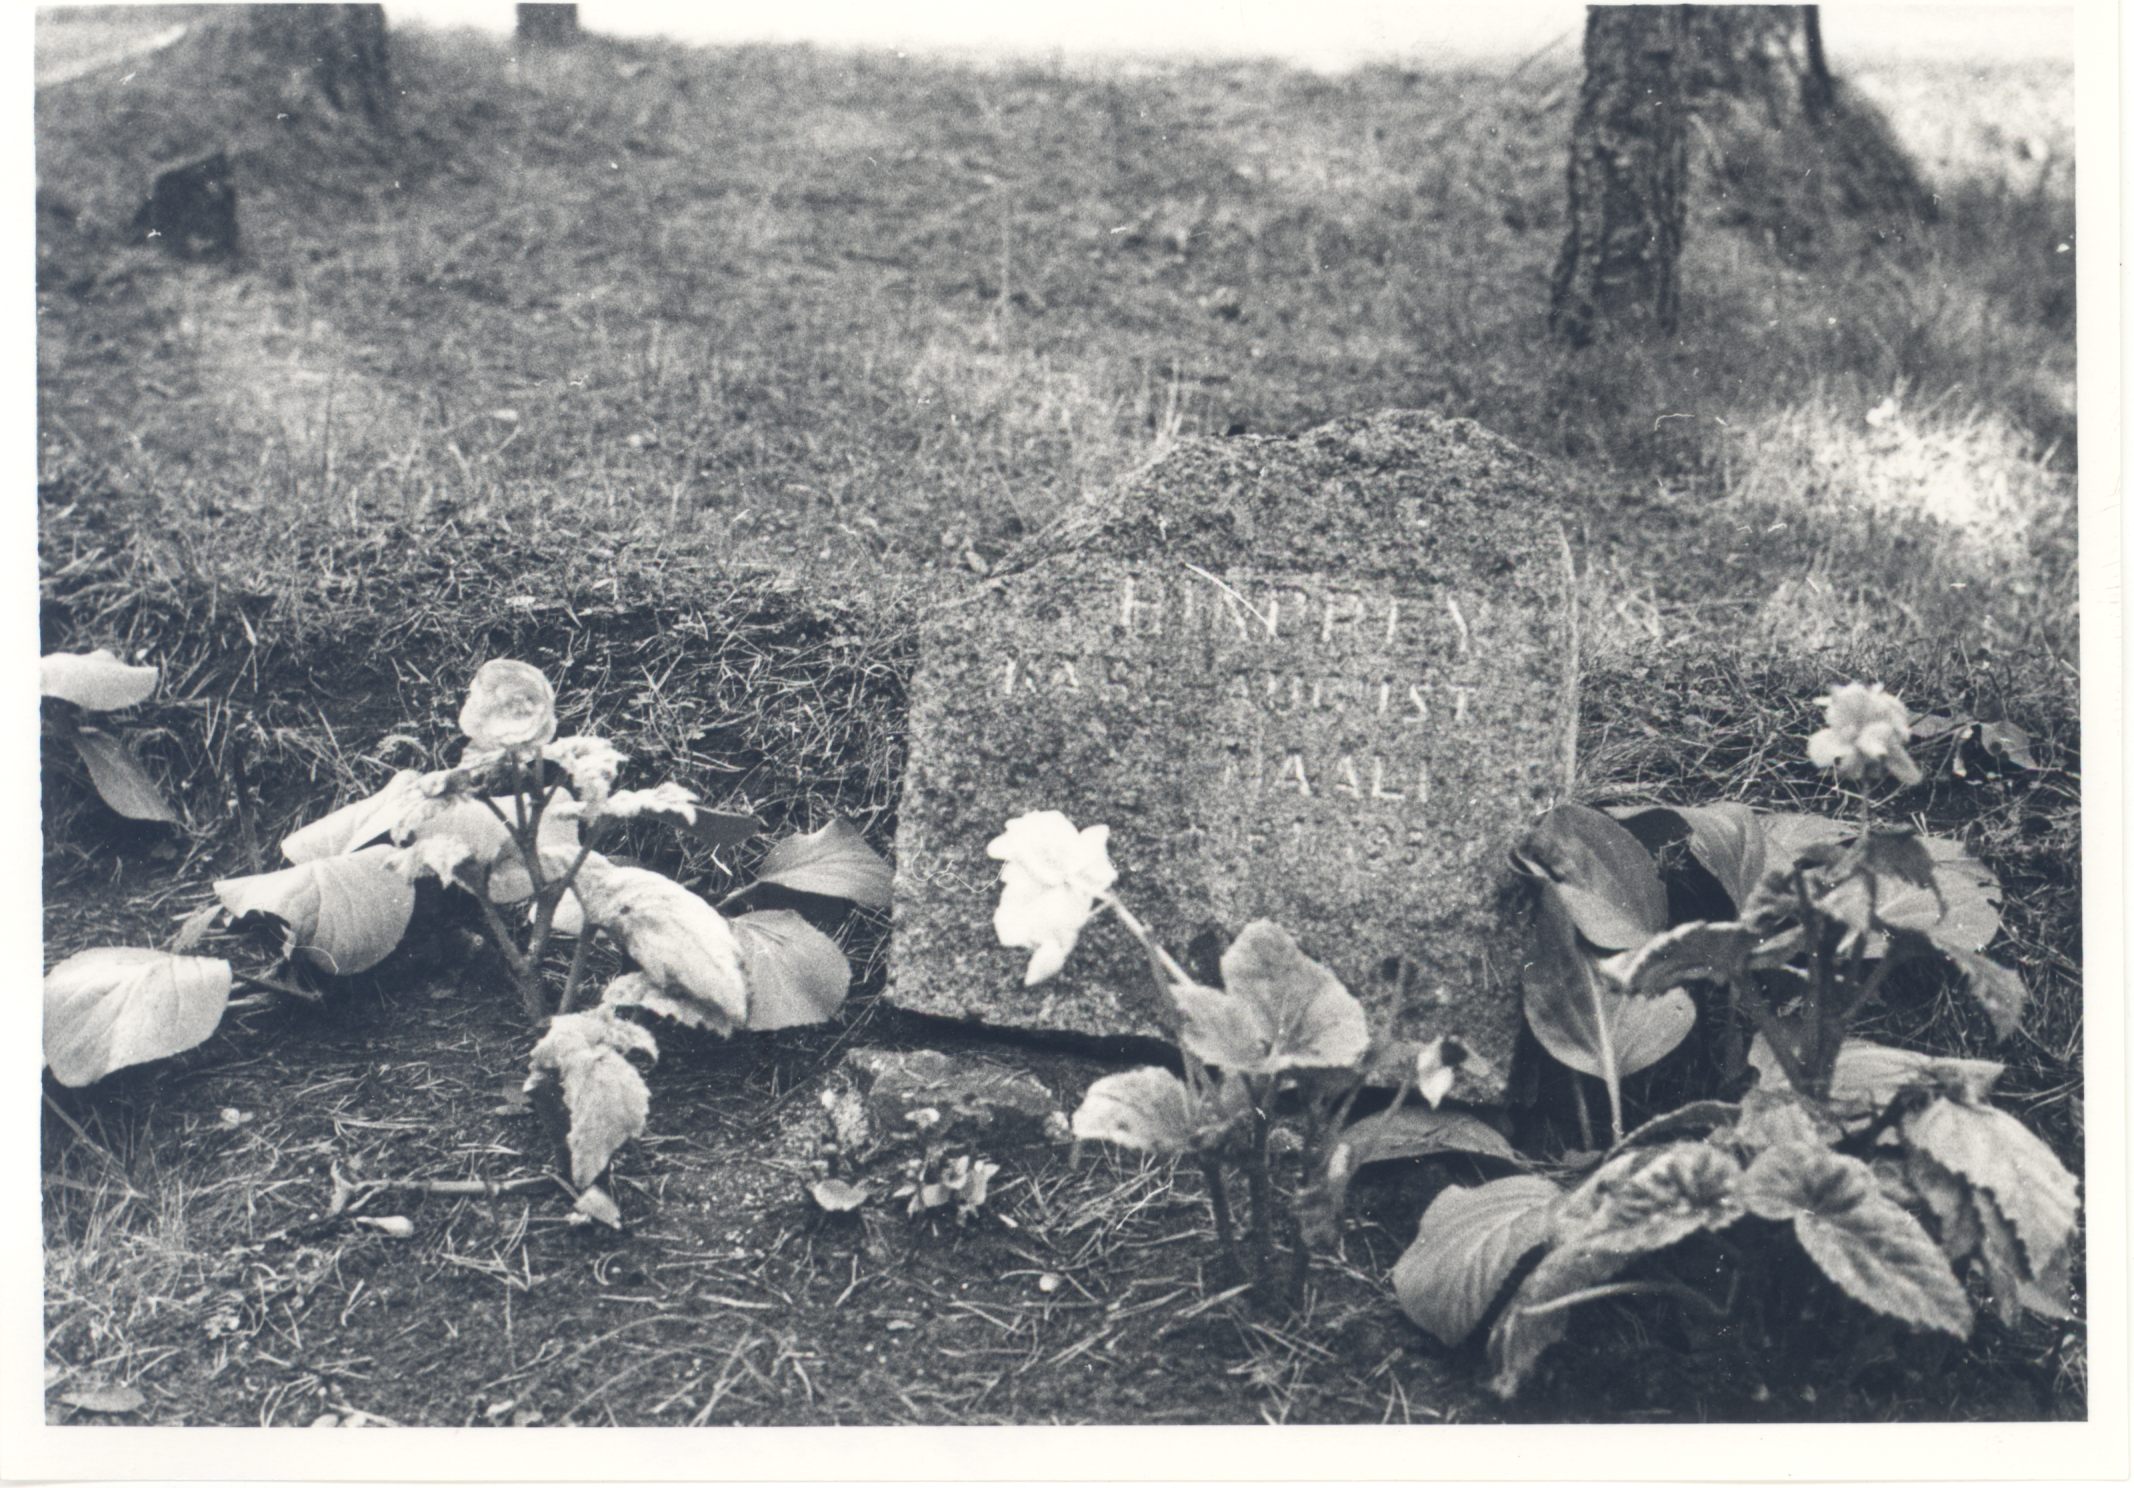 Hindrey, Karl August - grave at the Tallinn Forest Hall